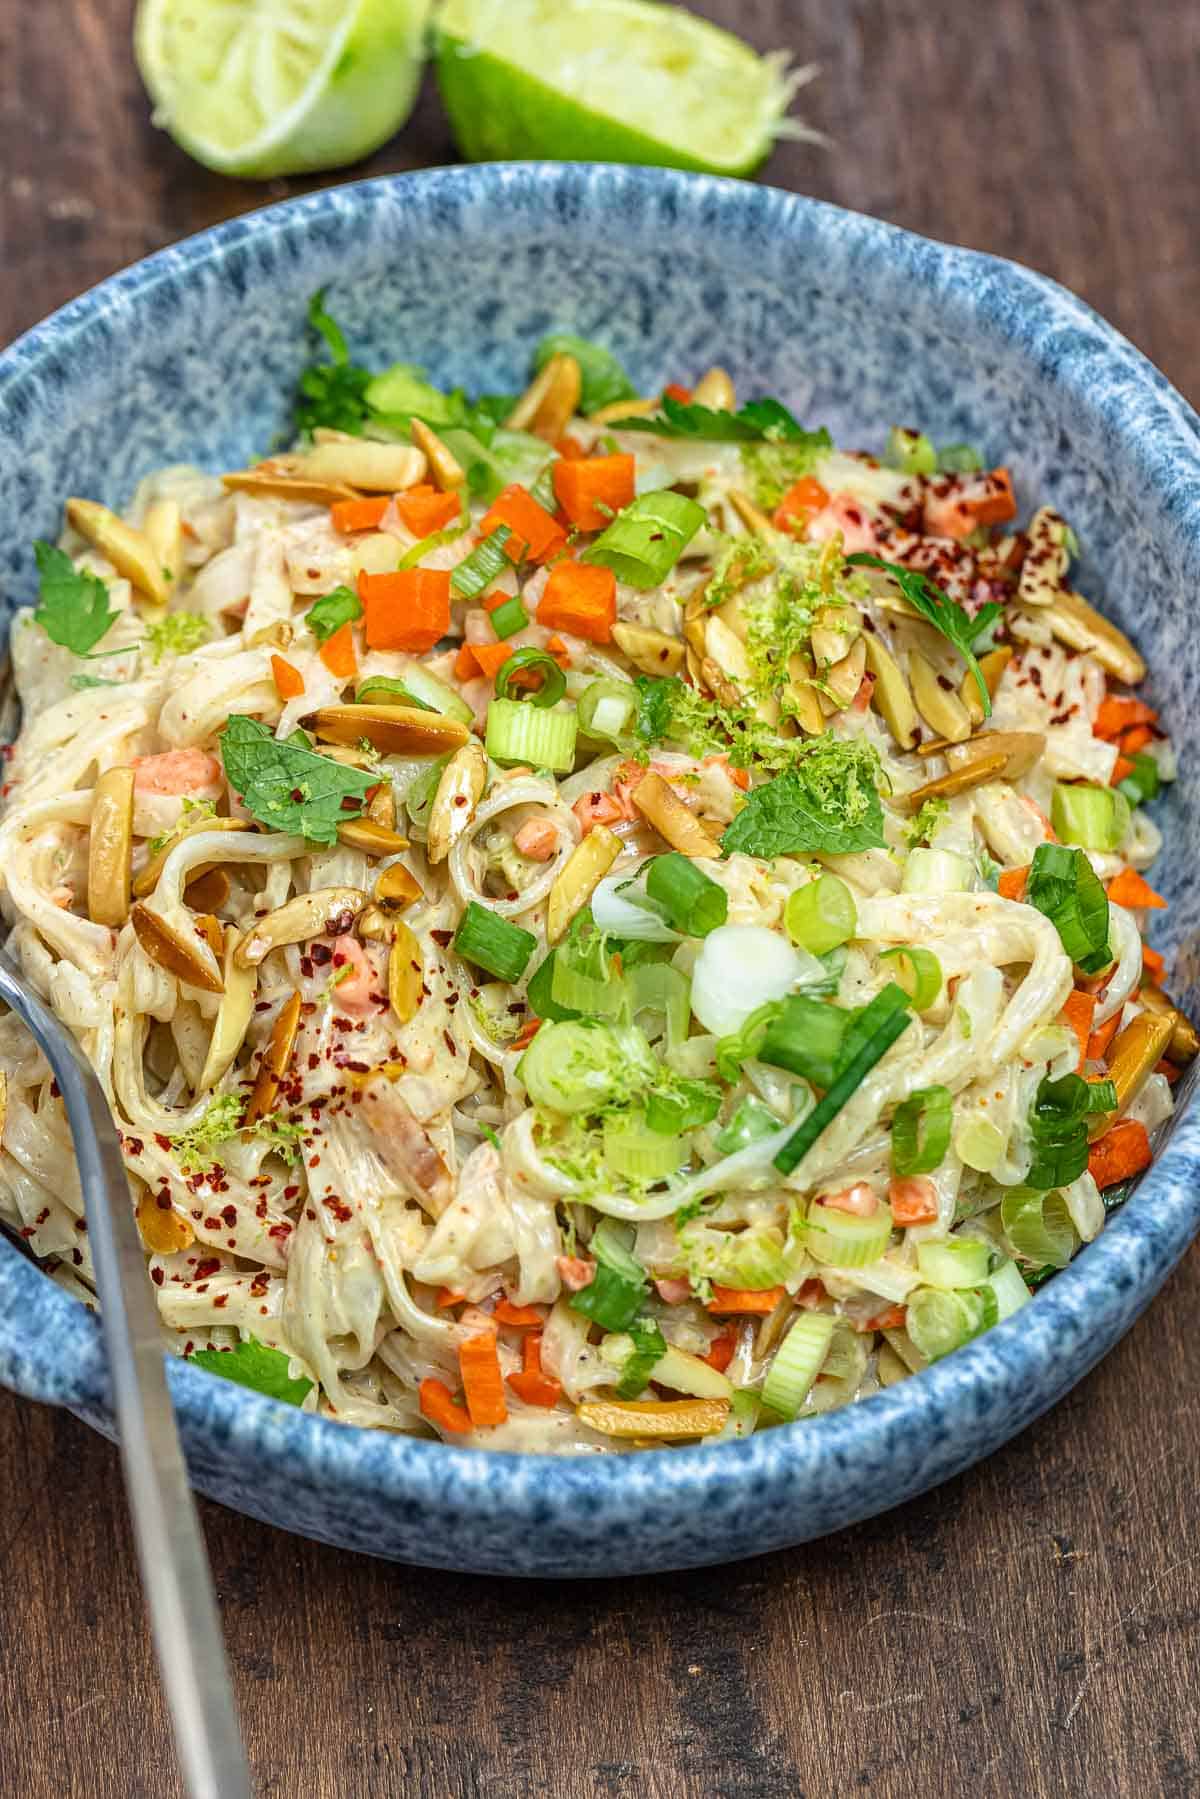 rice noodle salad with vegetables and tahini dressing in a blue bowl.